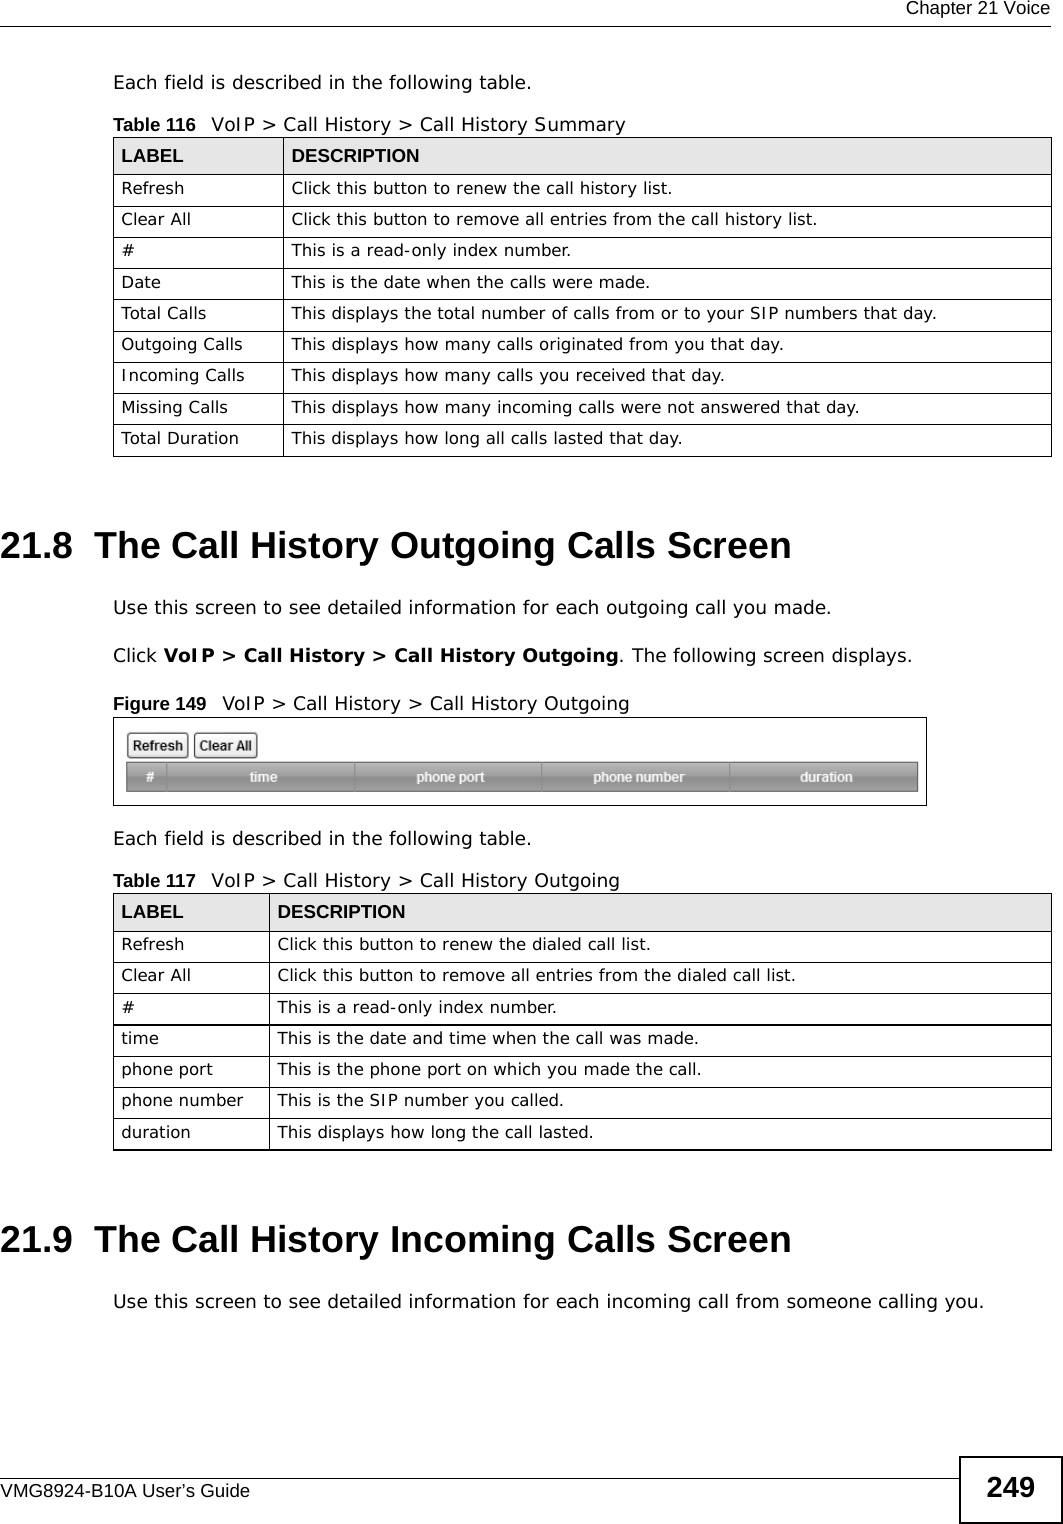  Chapter 21 VoiceVMG8924-B10A User’s Guide 249Each field is described in the following table.21.8  The Call History Outgoing Calls ScreenUse this screen to see detailed information for each outgoing call you made.Click VoIP &gt; Call History &gt; Call History Outgoing. The following screen displays.Figure 149   VoIP &gt; Call History &gt; Call History OutgoingEach field is described in the following table.21.9  The Call History Incoming Calls ScreenUse this screen to see detailed information for each incoming call from someone calling you.Table 116   VoIP &gt; Call History &gt; Call History SummaryLABEL DESCRIPTIONRefresh Click this button to renew the call history list.Clear All Click this button to remove all entries from the call history list.#This is a read-only index number.Date This is the date when the calls were made.Total Calls This displays the total number of calls from or to your SIP numbers that day.Outgoing Calls This displays how many calls originated from you that day.Incoming Calls  This displays how many calls you received that day.Missing Calls This displays how many incoming calls were not answered that day.Total Duration This displays how long all calls lasted that day.Table 117   VoIP &gt; Call History &gt; Call History OutgoingLABEL DESCRIPTIONRefresh Click this button to renew the dialed call list.Clear All Click this button to remove all entries from the dialed call list.#This is a read-only index number.time This is the date and time when the call was made.phone port This is the phone port on which you made the call.phone number This is the SIP number you called.duration This displays how long the call lasted.